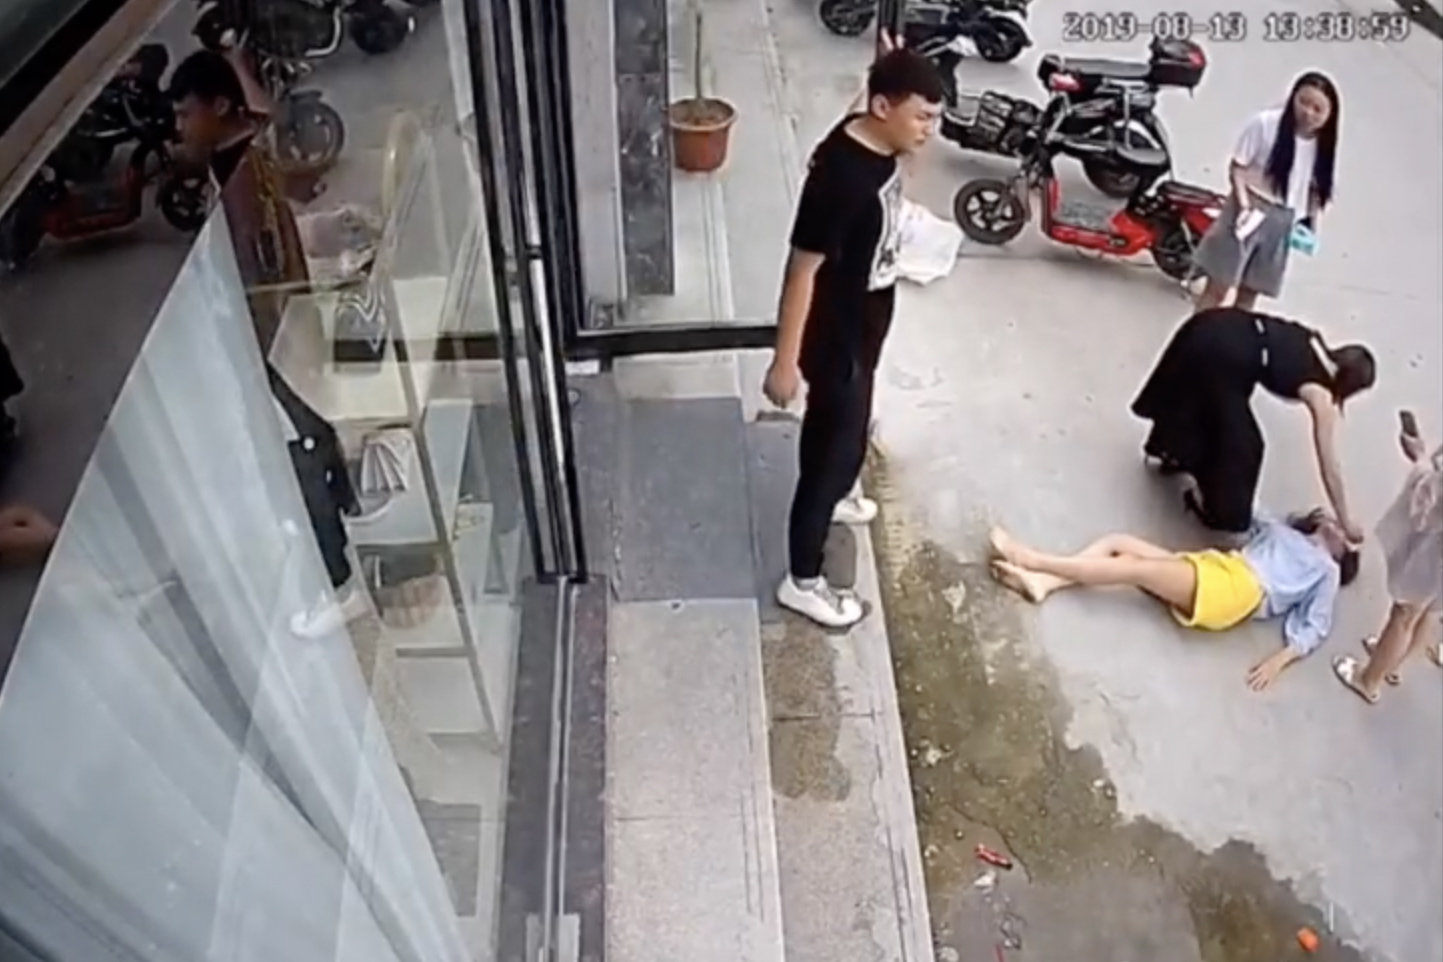 An image from surveillance footage shows Liu Zengyan on the street after jumping from a window to escape from an assault by her husband at the time, shown standing on the sidewalk, in Shangqiu, China, in August 2019. (via The New York Times)